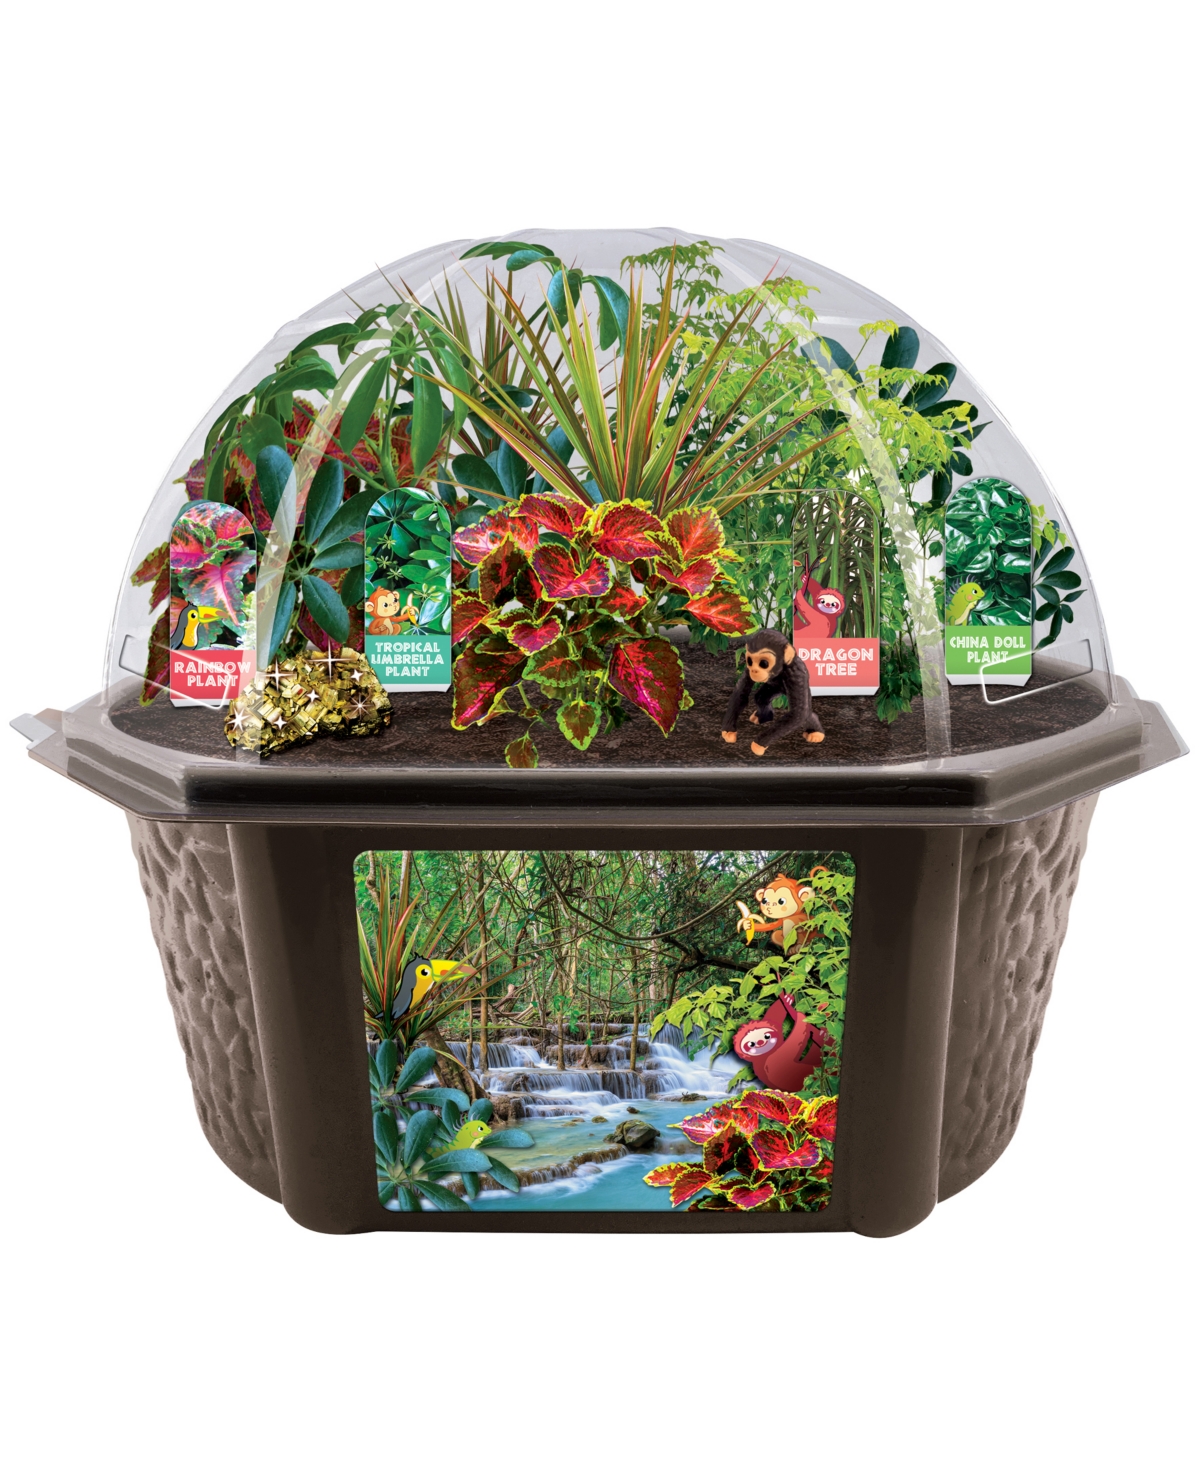 Areyougame Toys By Nature Biosphere Terrarium In No Color